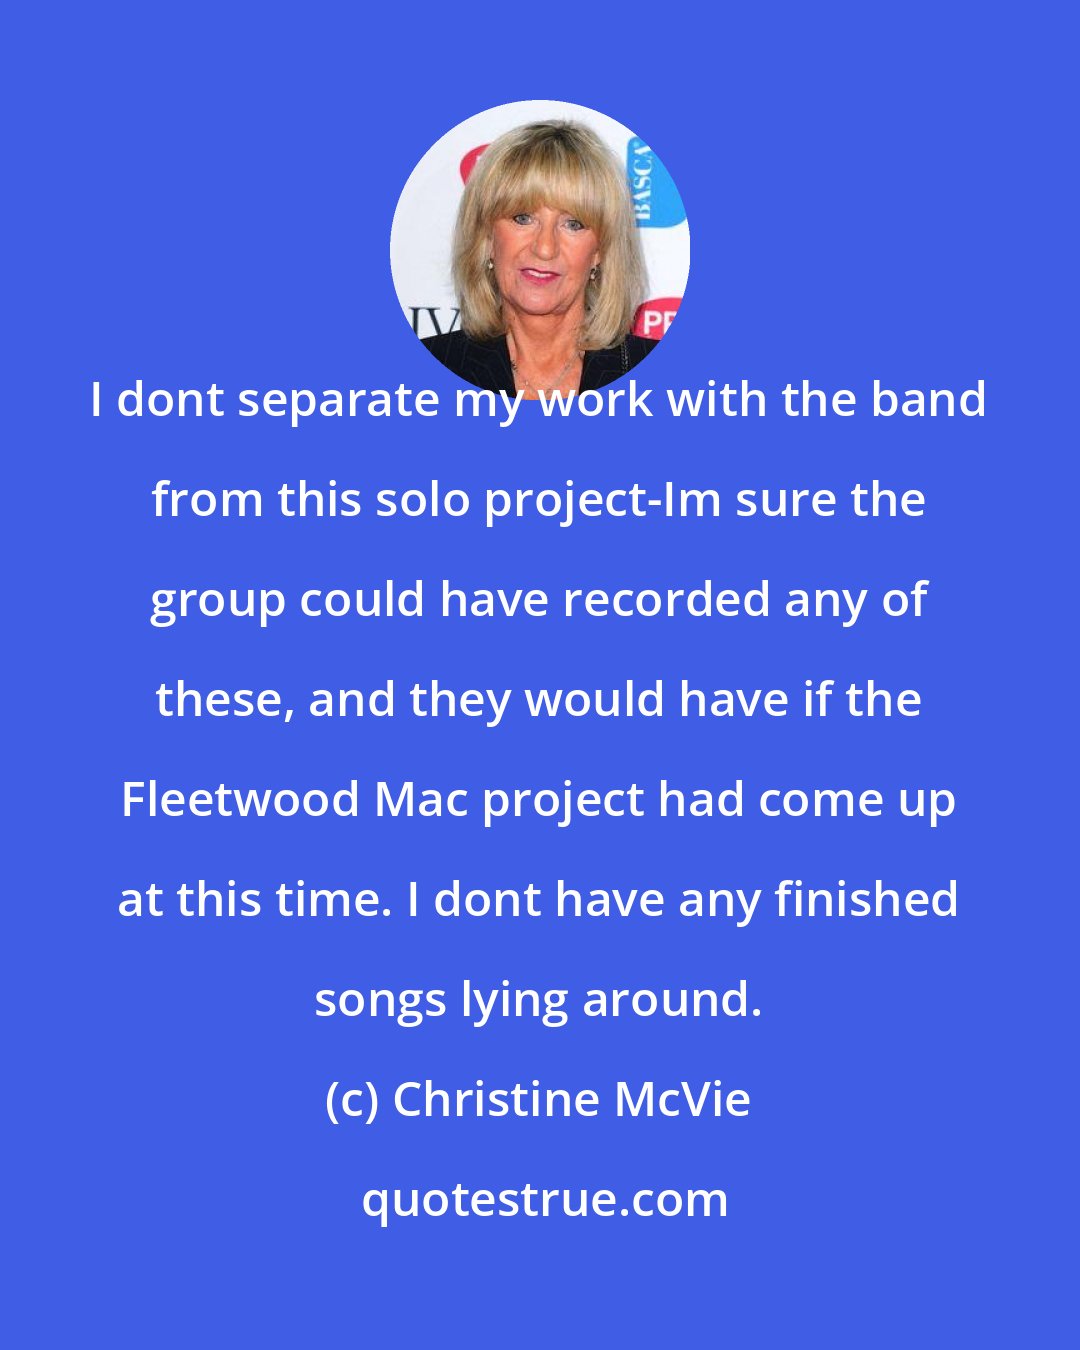 Christine McVie: I dont separate my work with the band from this solo project-Im sure the group could have recorded any of these, and they would have if the Fleetwood Mac project had come up at this time. I dont have any finished songs lying around.